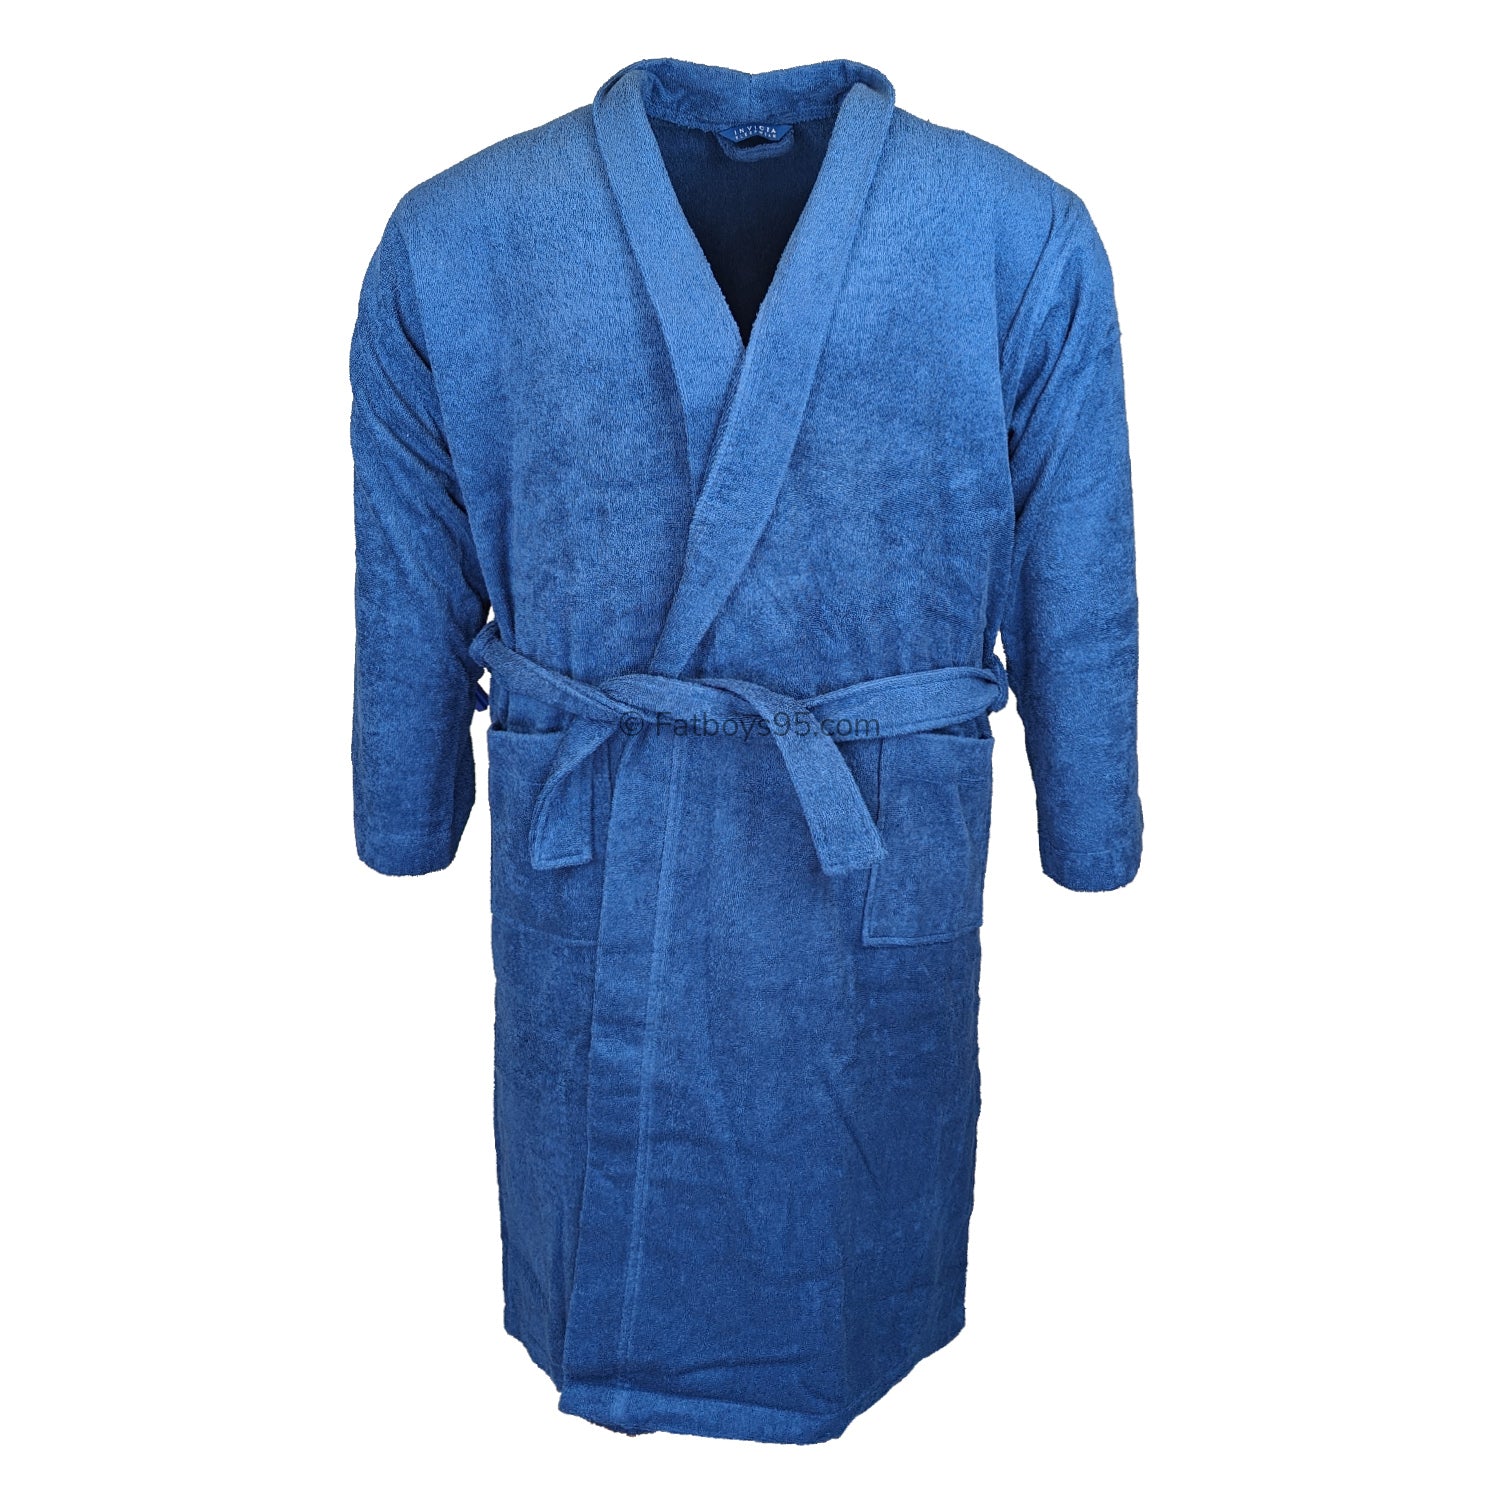 Invicta Dressing Gown - 08533 - Blue 1